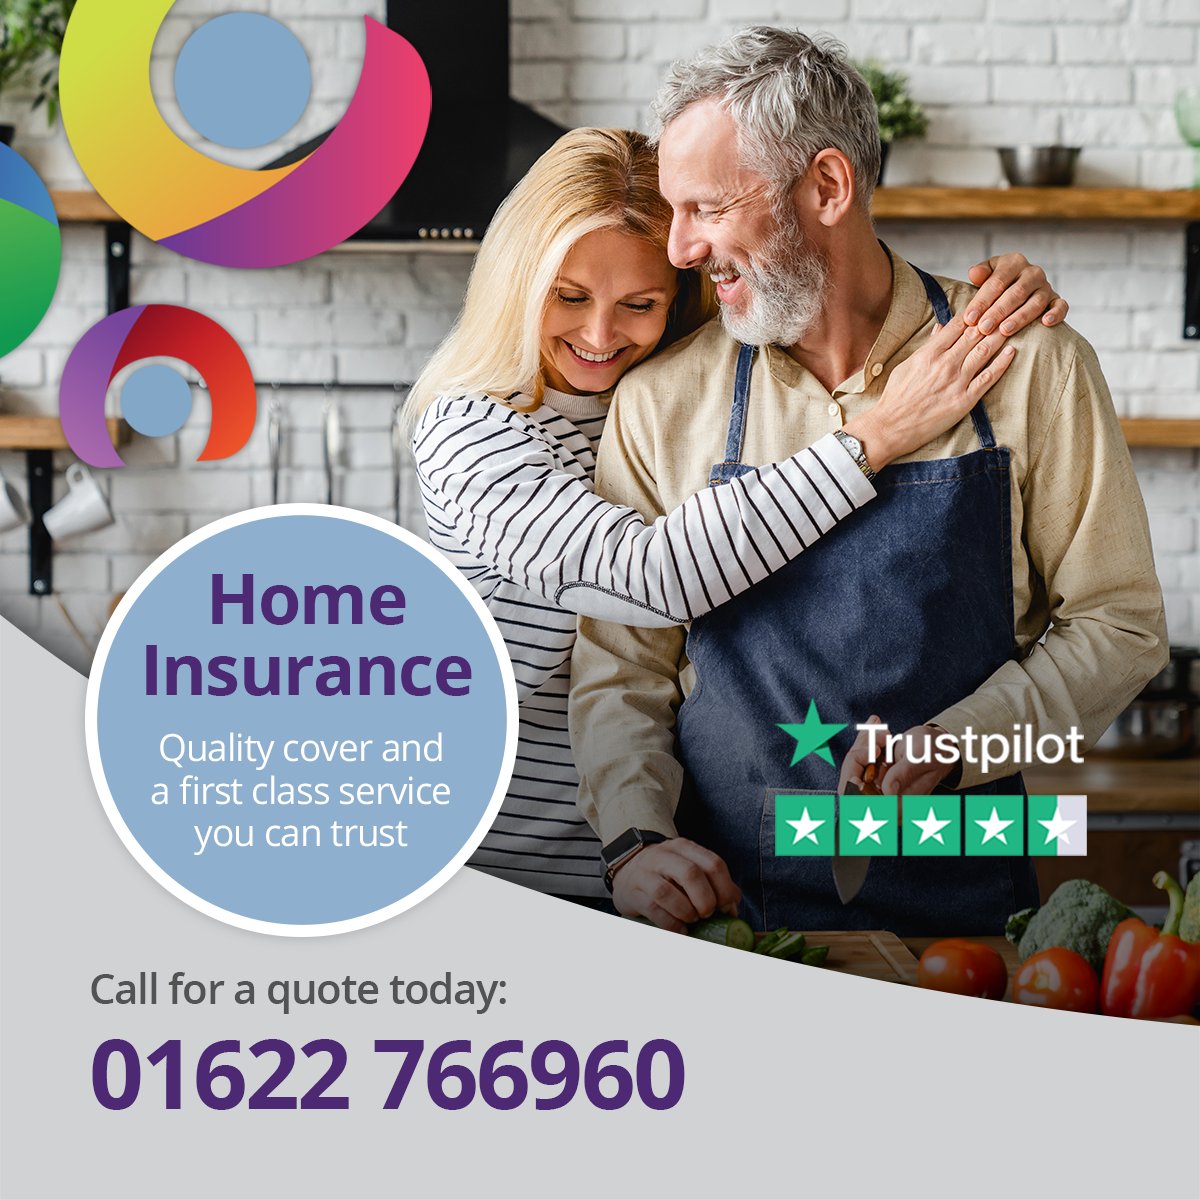 Protect your home with our range of buildings, contents and combined policies to meet your needs. Our friendly and knowledgeable team are here for you. Call us today for a competitive quote on 01622 766960. Find out more today at: csis.co.uk/home-insurance